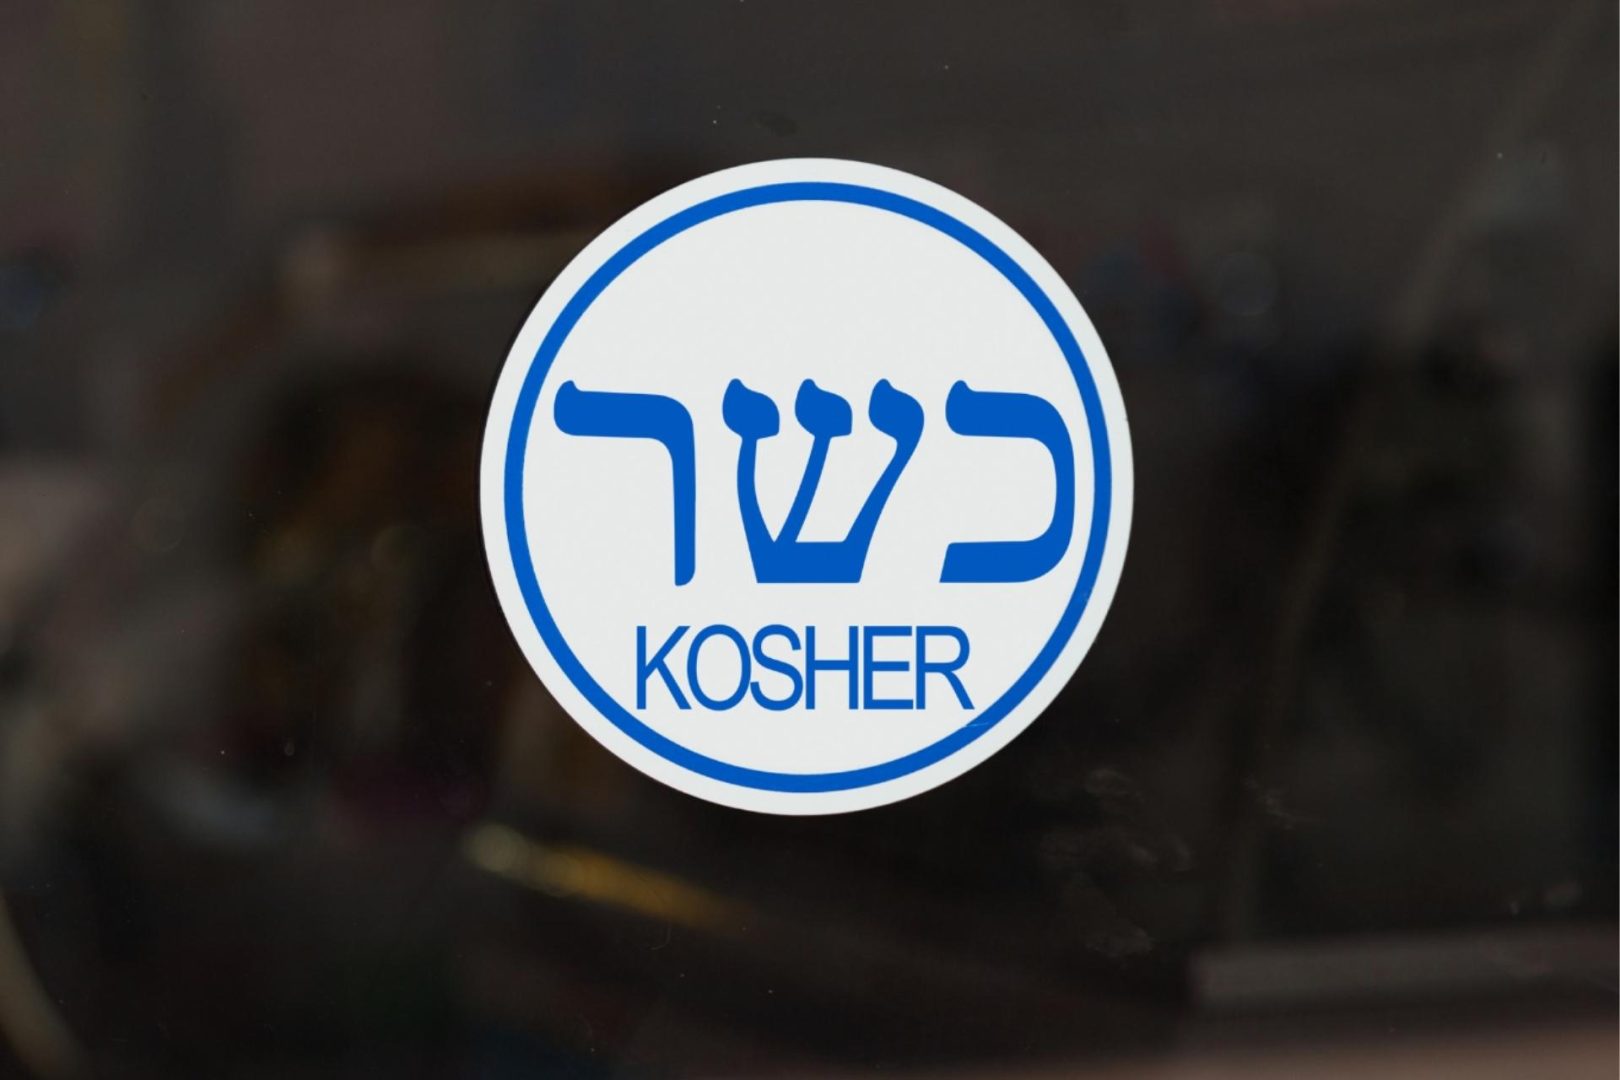 Blue text featuring the Hebrew word for Kosher and the word Kosher written out inside a white circle with a dark background around it.